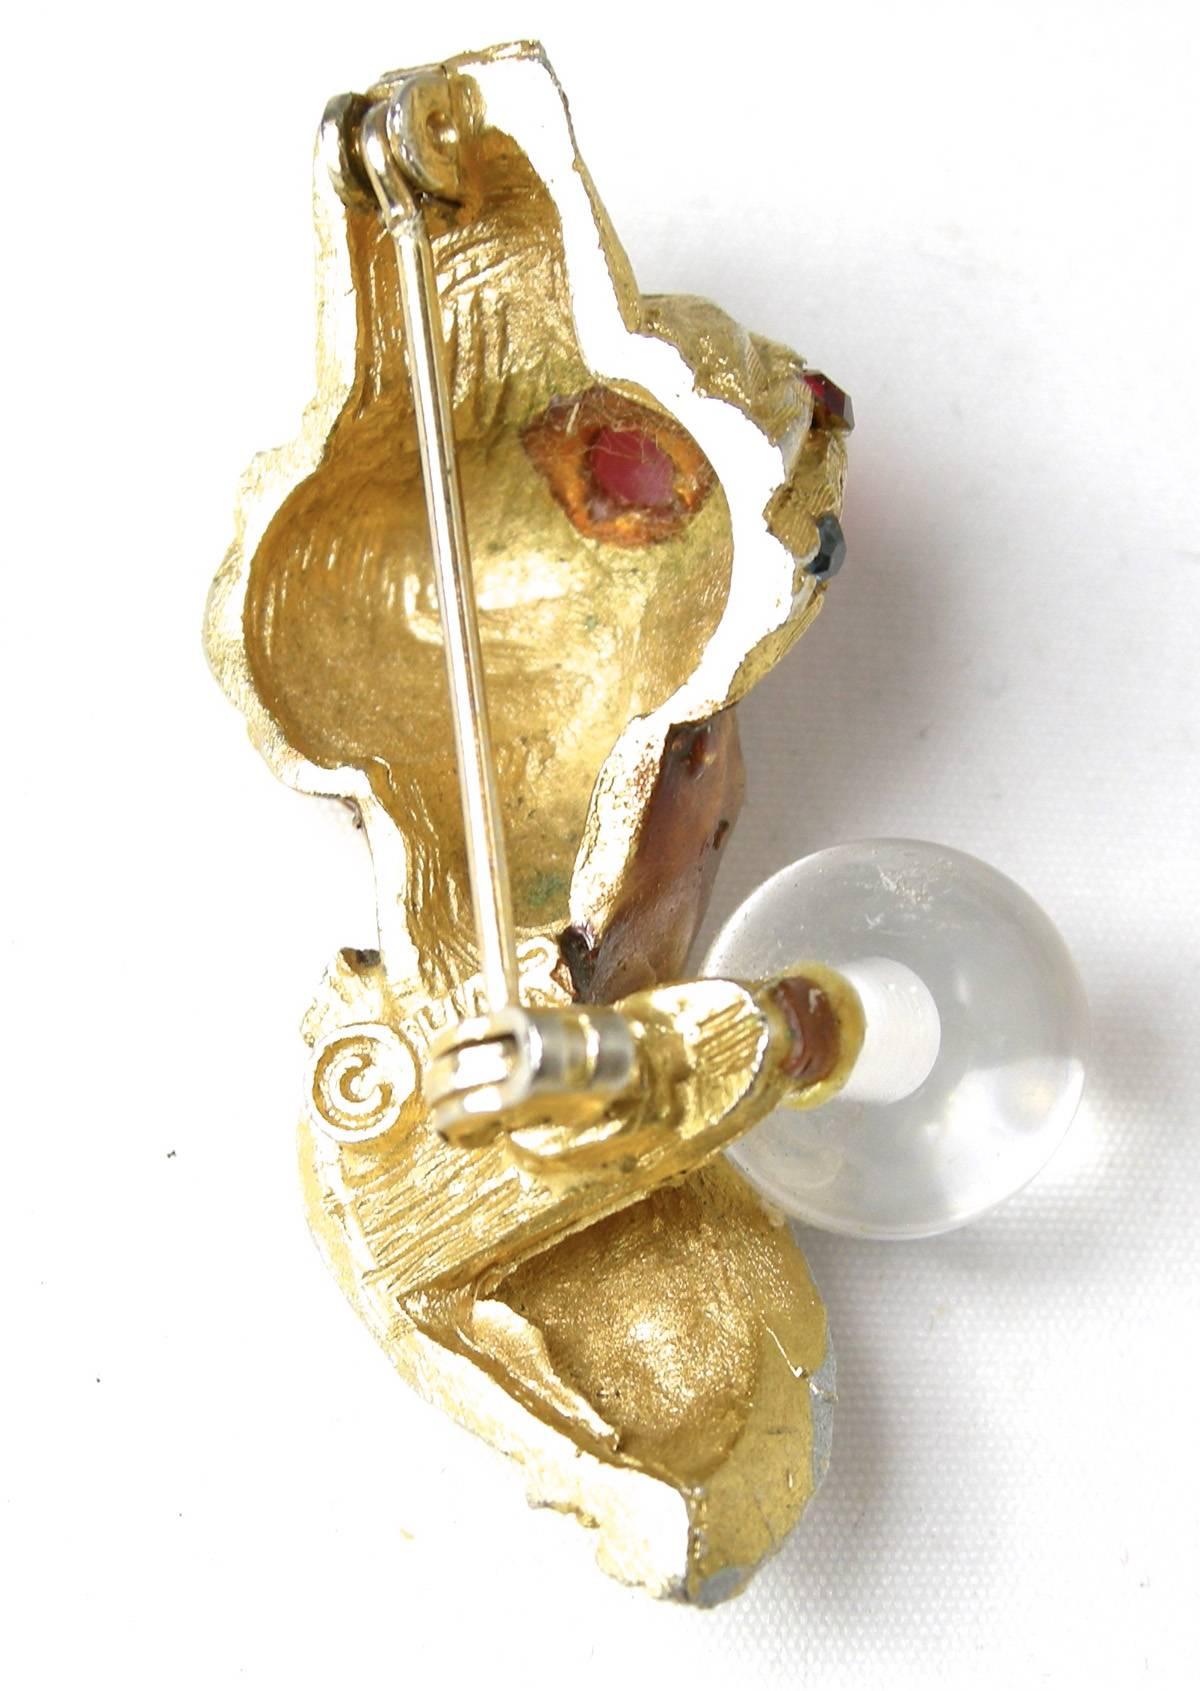 This is the famous 1950s vintage Har genie brooch holding his crystal ball. His turban has a red cabochon in the center and is accentuated with green, red and clear rhinestones.  It is set in a gold tone metal finish and measures 1-5/8” x 3/4”.  It